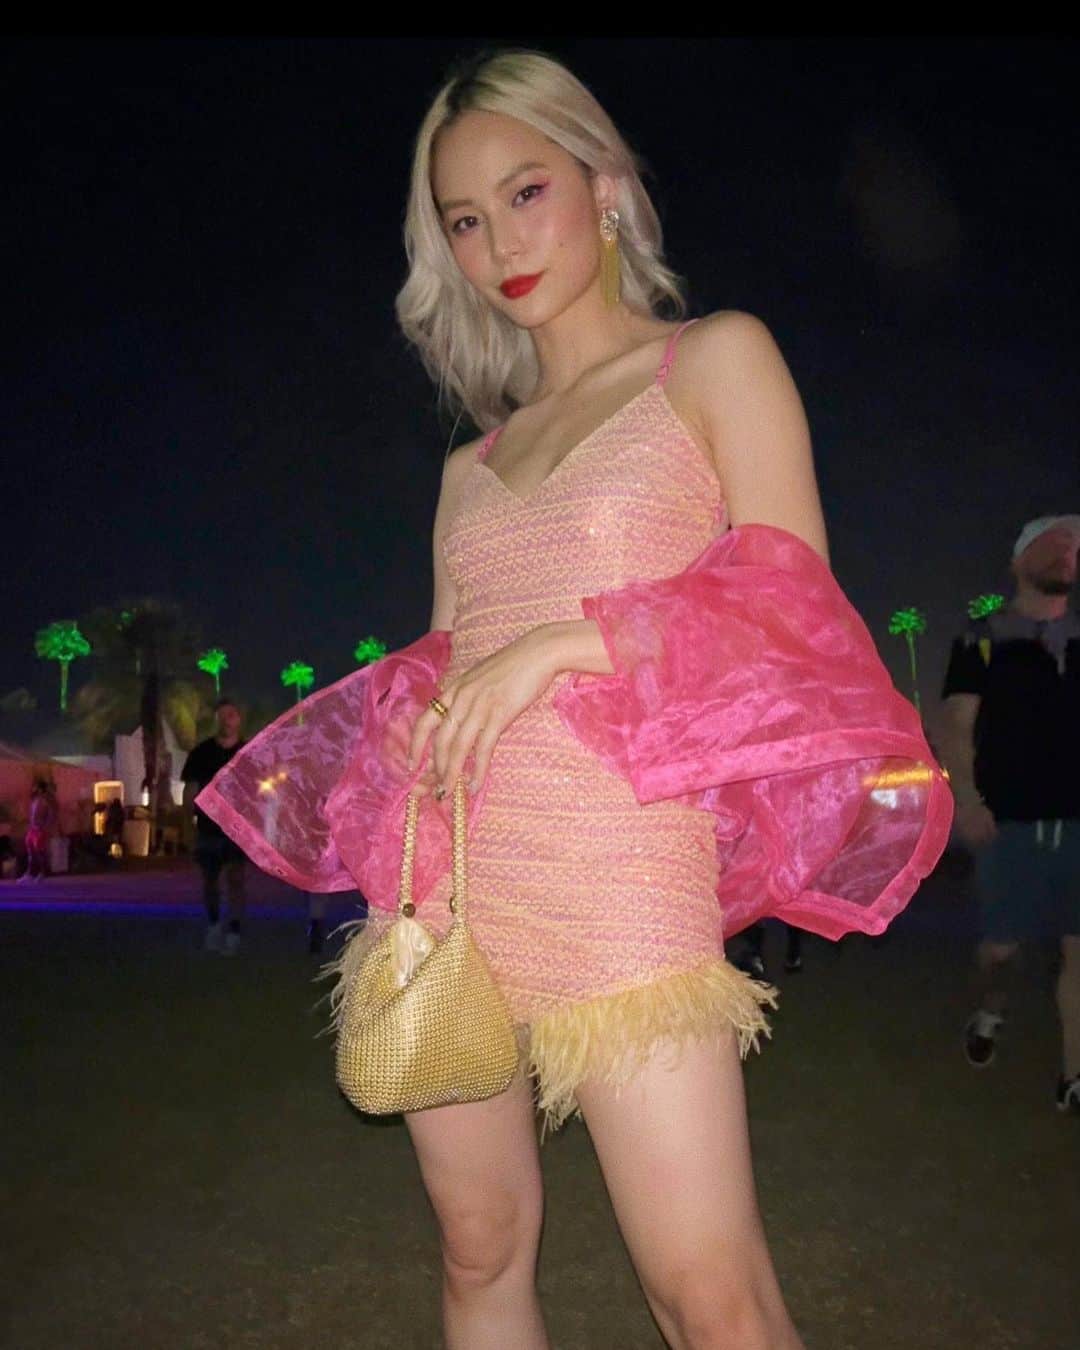 Yukiのインスタグラム：「Even though my phone got stolen and there was a whole lot of miscommunications, I had fun 💕   Special thanks to the ones I spent time with during Coachella Weekend 2 ☺️ The artist pass and after parties were so fun🙏🏼🥲 I felt so spoiled, thank you ♥️  Wearing : @matildecouture dress, pink blouse by @santegrace, earrings by @frjewels @pr_solo   #coachella #coachellaweekend2 #coachellaoutfit」